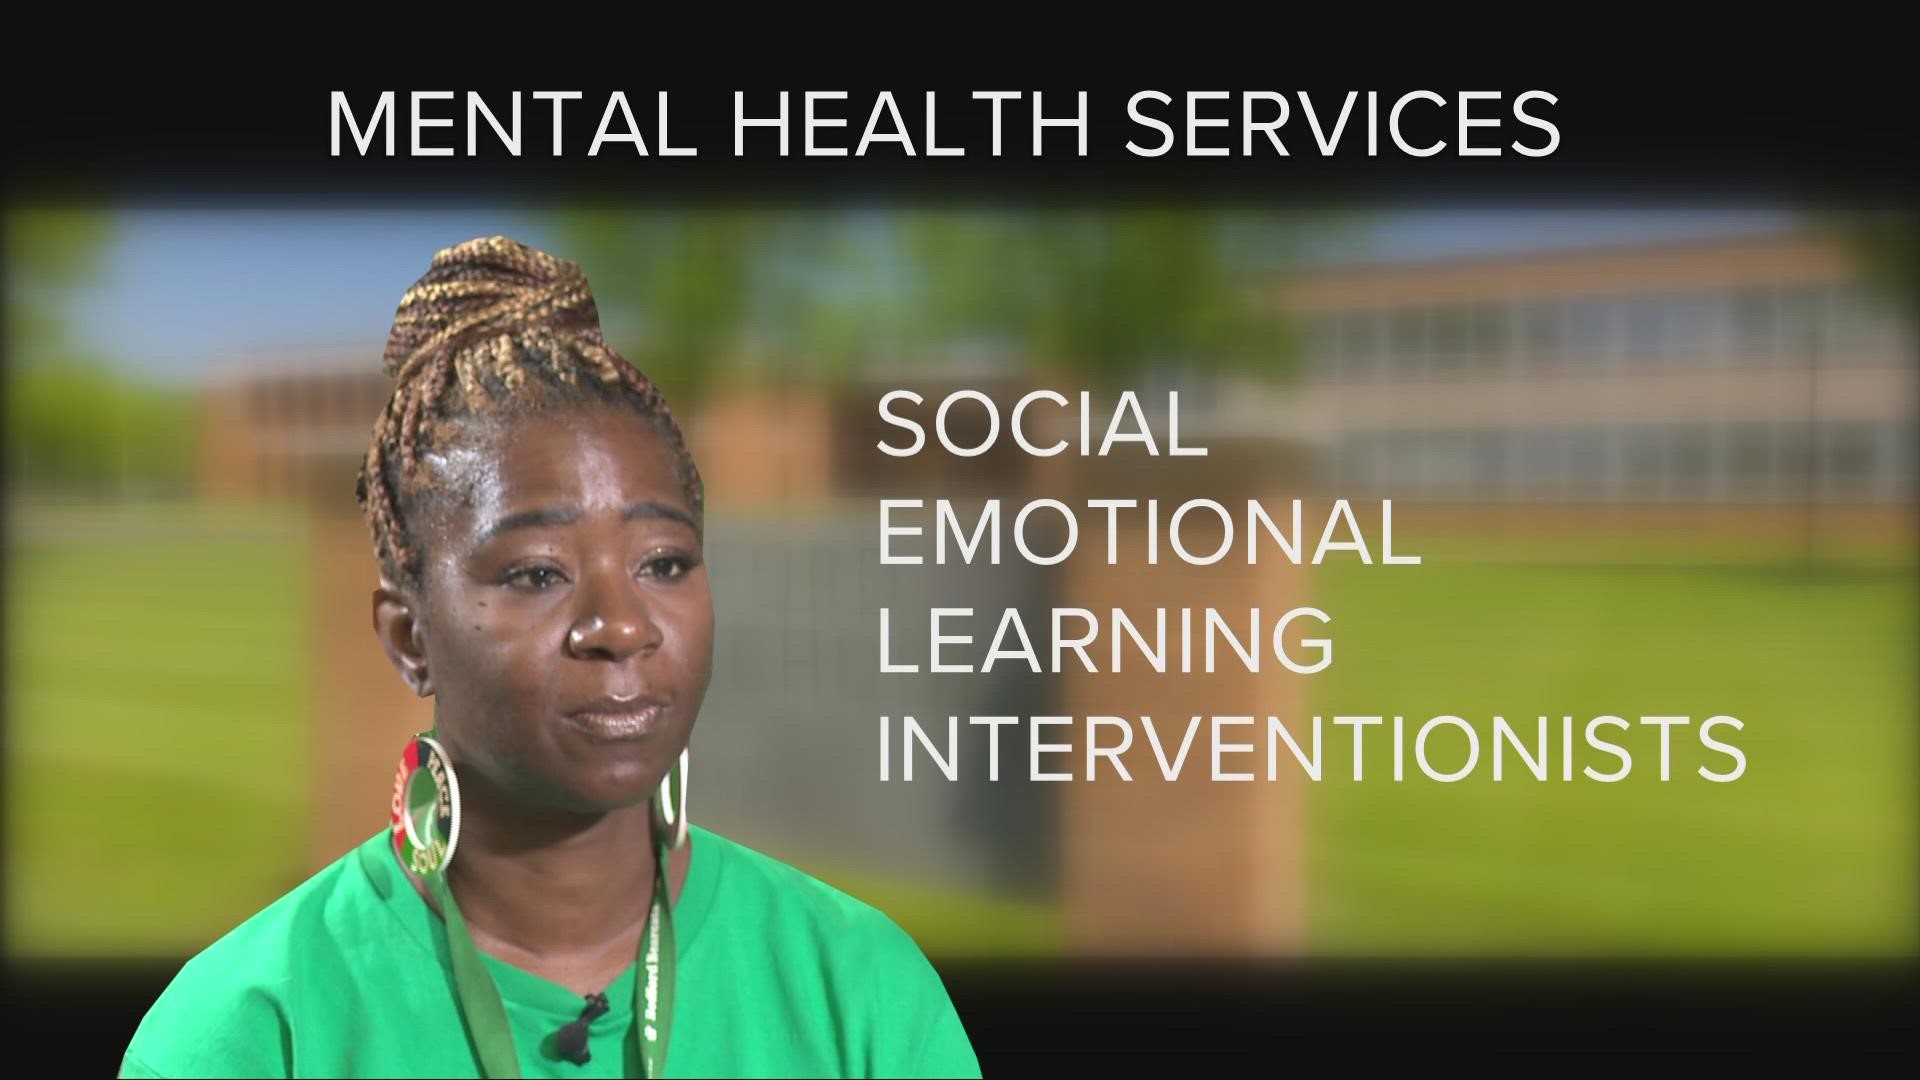 The district has added new social, emotional learning interventionists to help students cope.